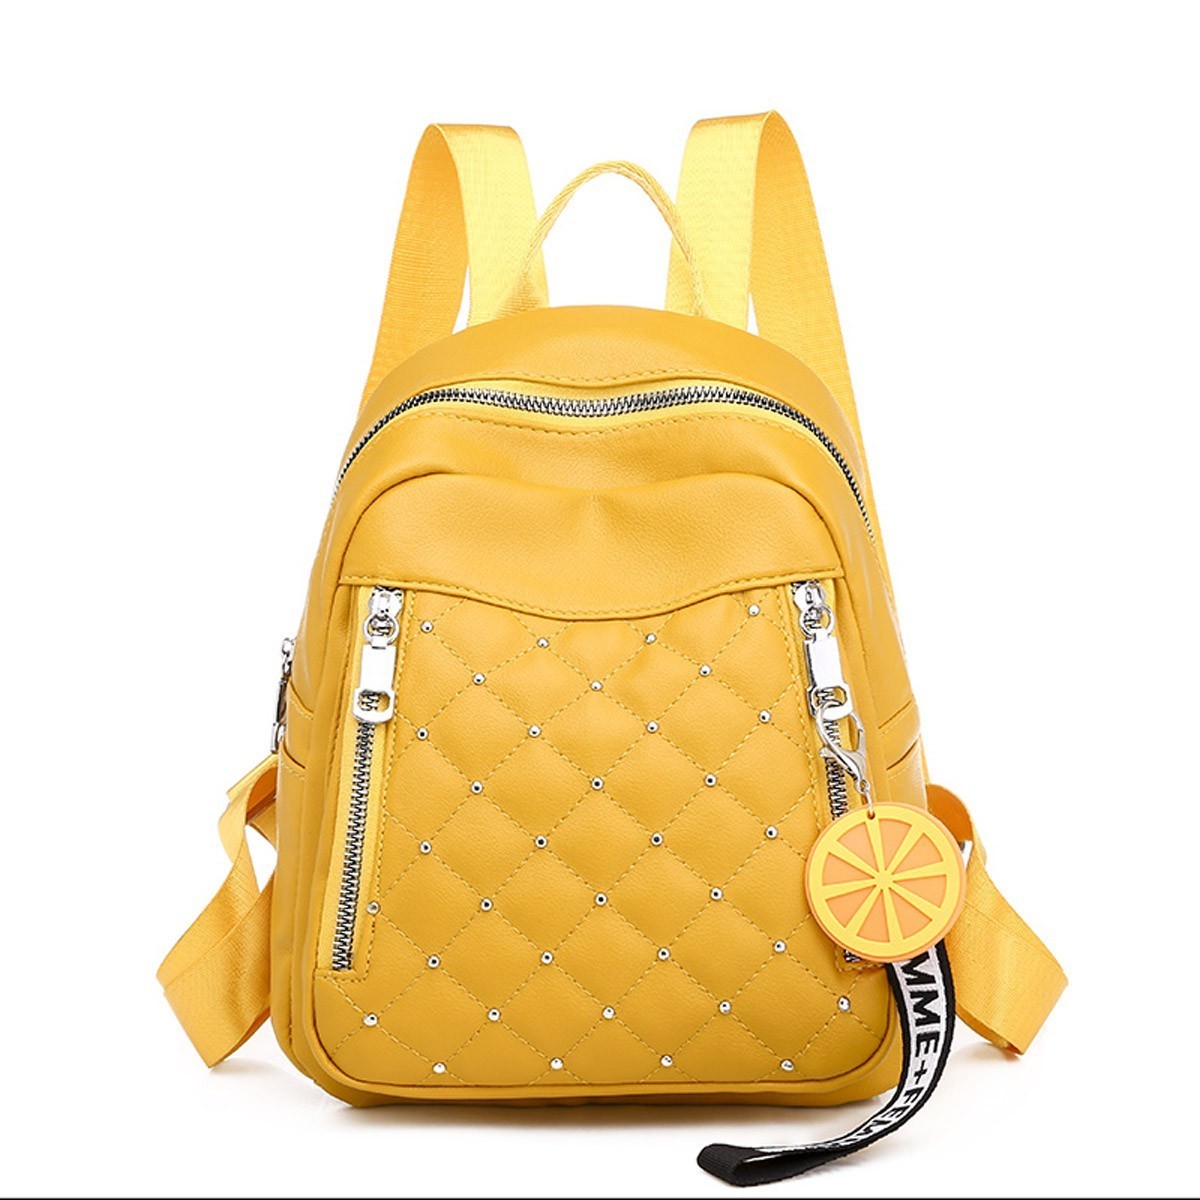 Brand new MCM yellow back pack , #MCM #backpack